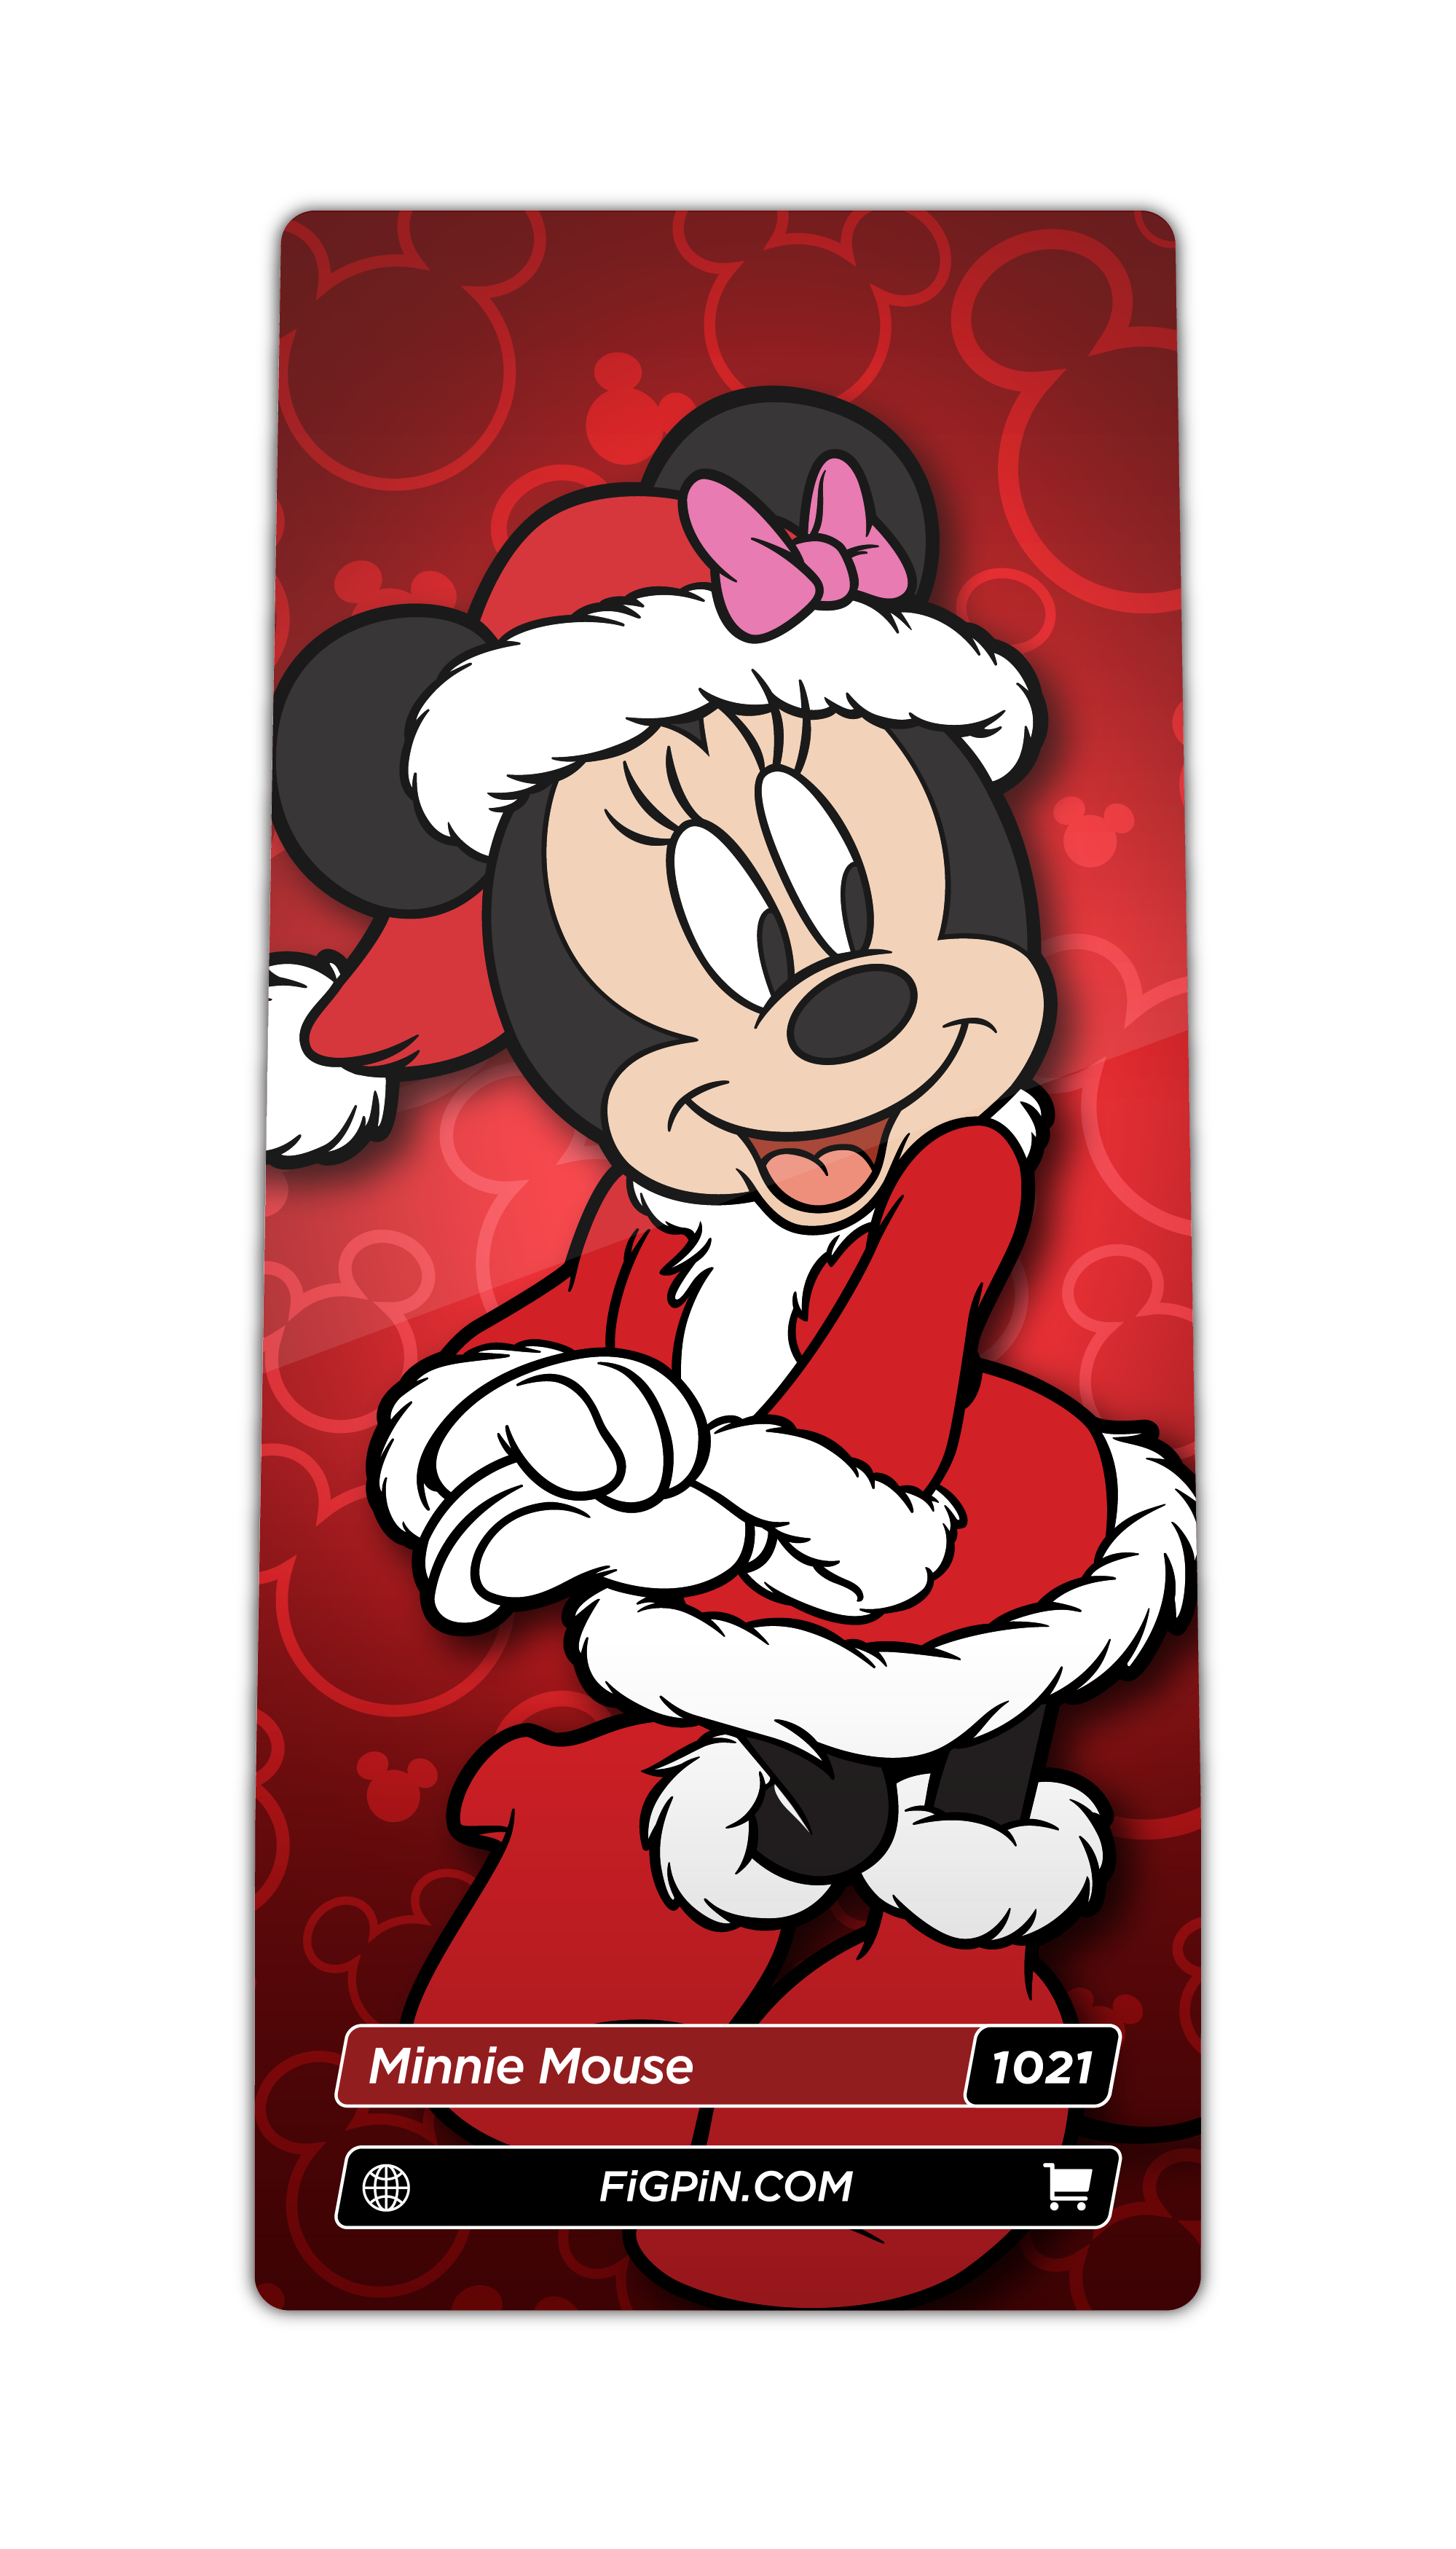 Character card of Disney's Minnie Mouse with text “Minnie Mouse (1021)” and link to FiGPiN’s website